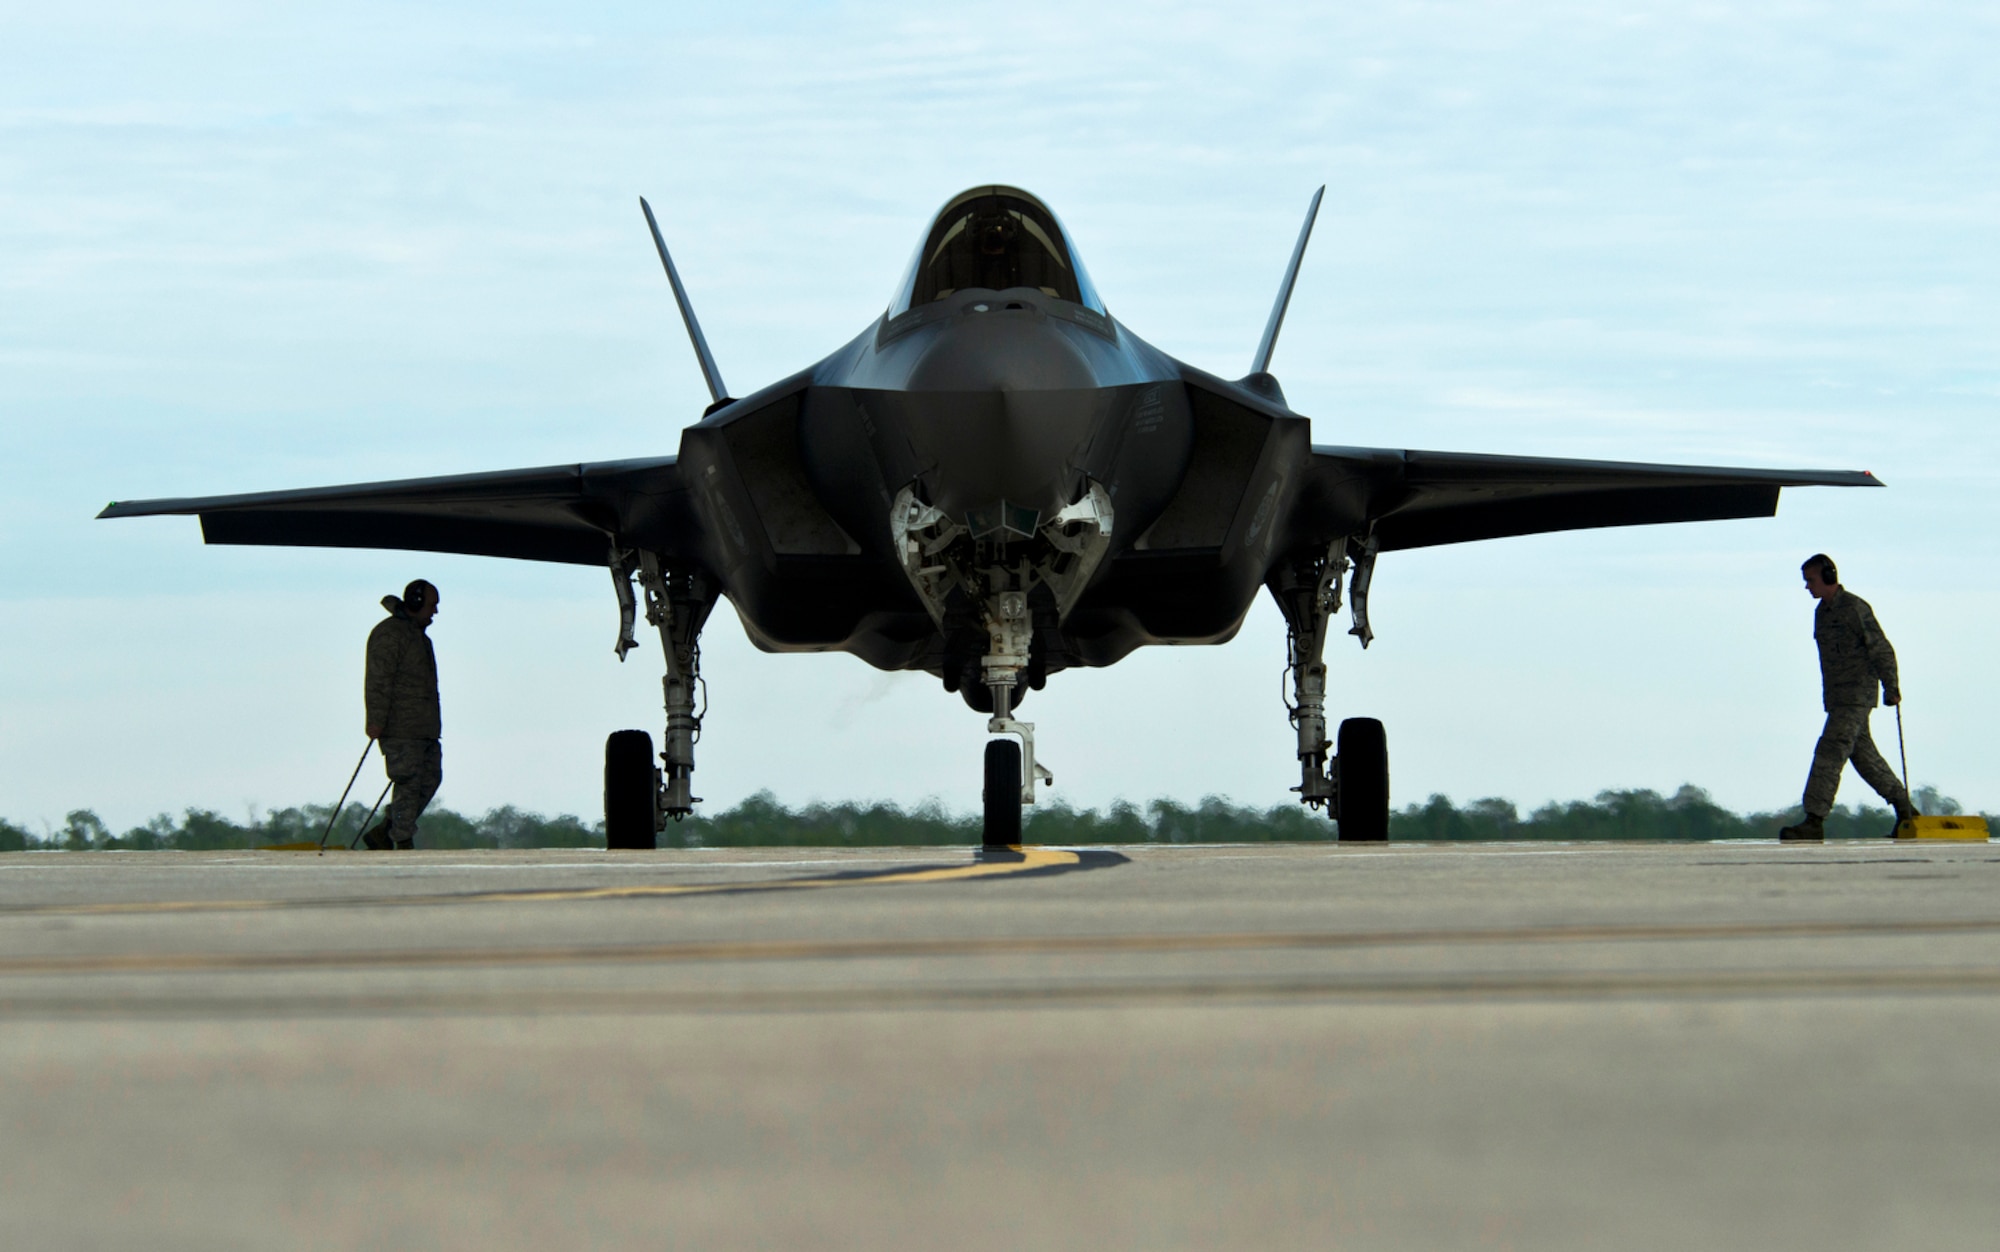 F-35A Lightning II joint strike fighter maintainers from the 58th Fighter Squadron at Eglin Air Force Base, Fla., prepare to park the jet after a local training mission over the Emerald Coast. (U.S. Air Force photo/Tech. Sgt. Bennie J. Davis III)